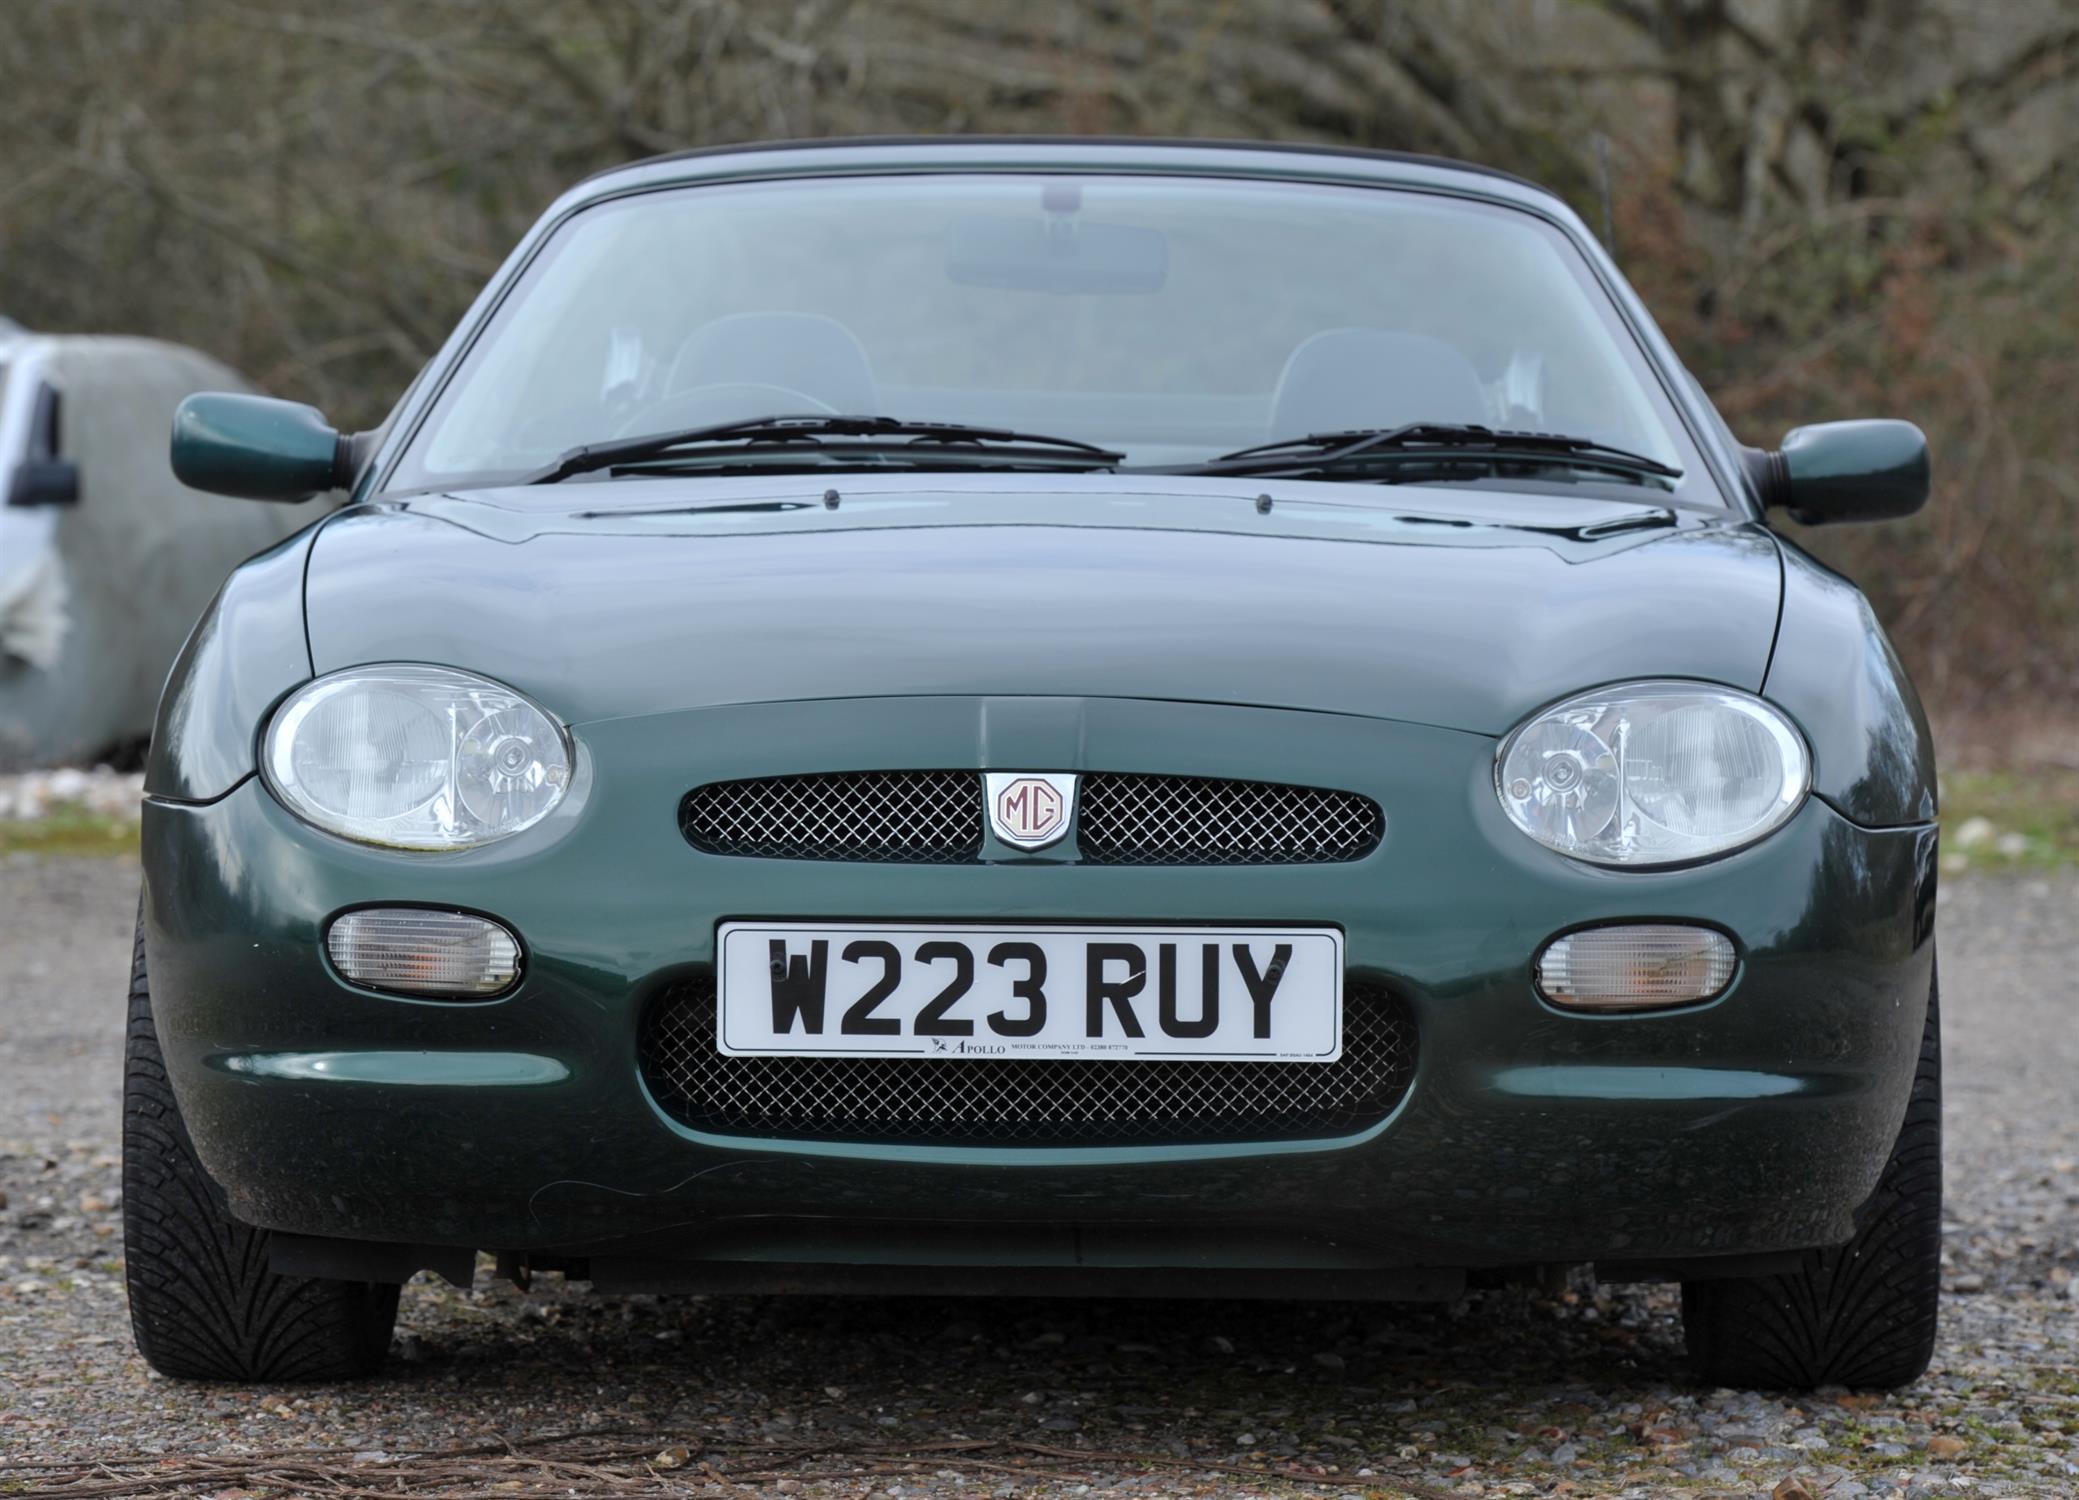 2000 MGF 1.8 Petrol VVC Manual. Registration number: W223 RUY. Mileage: 74,339. - Image 2 of 14